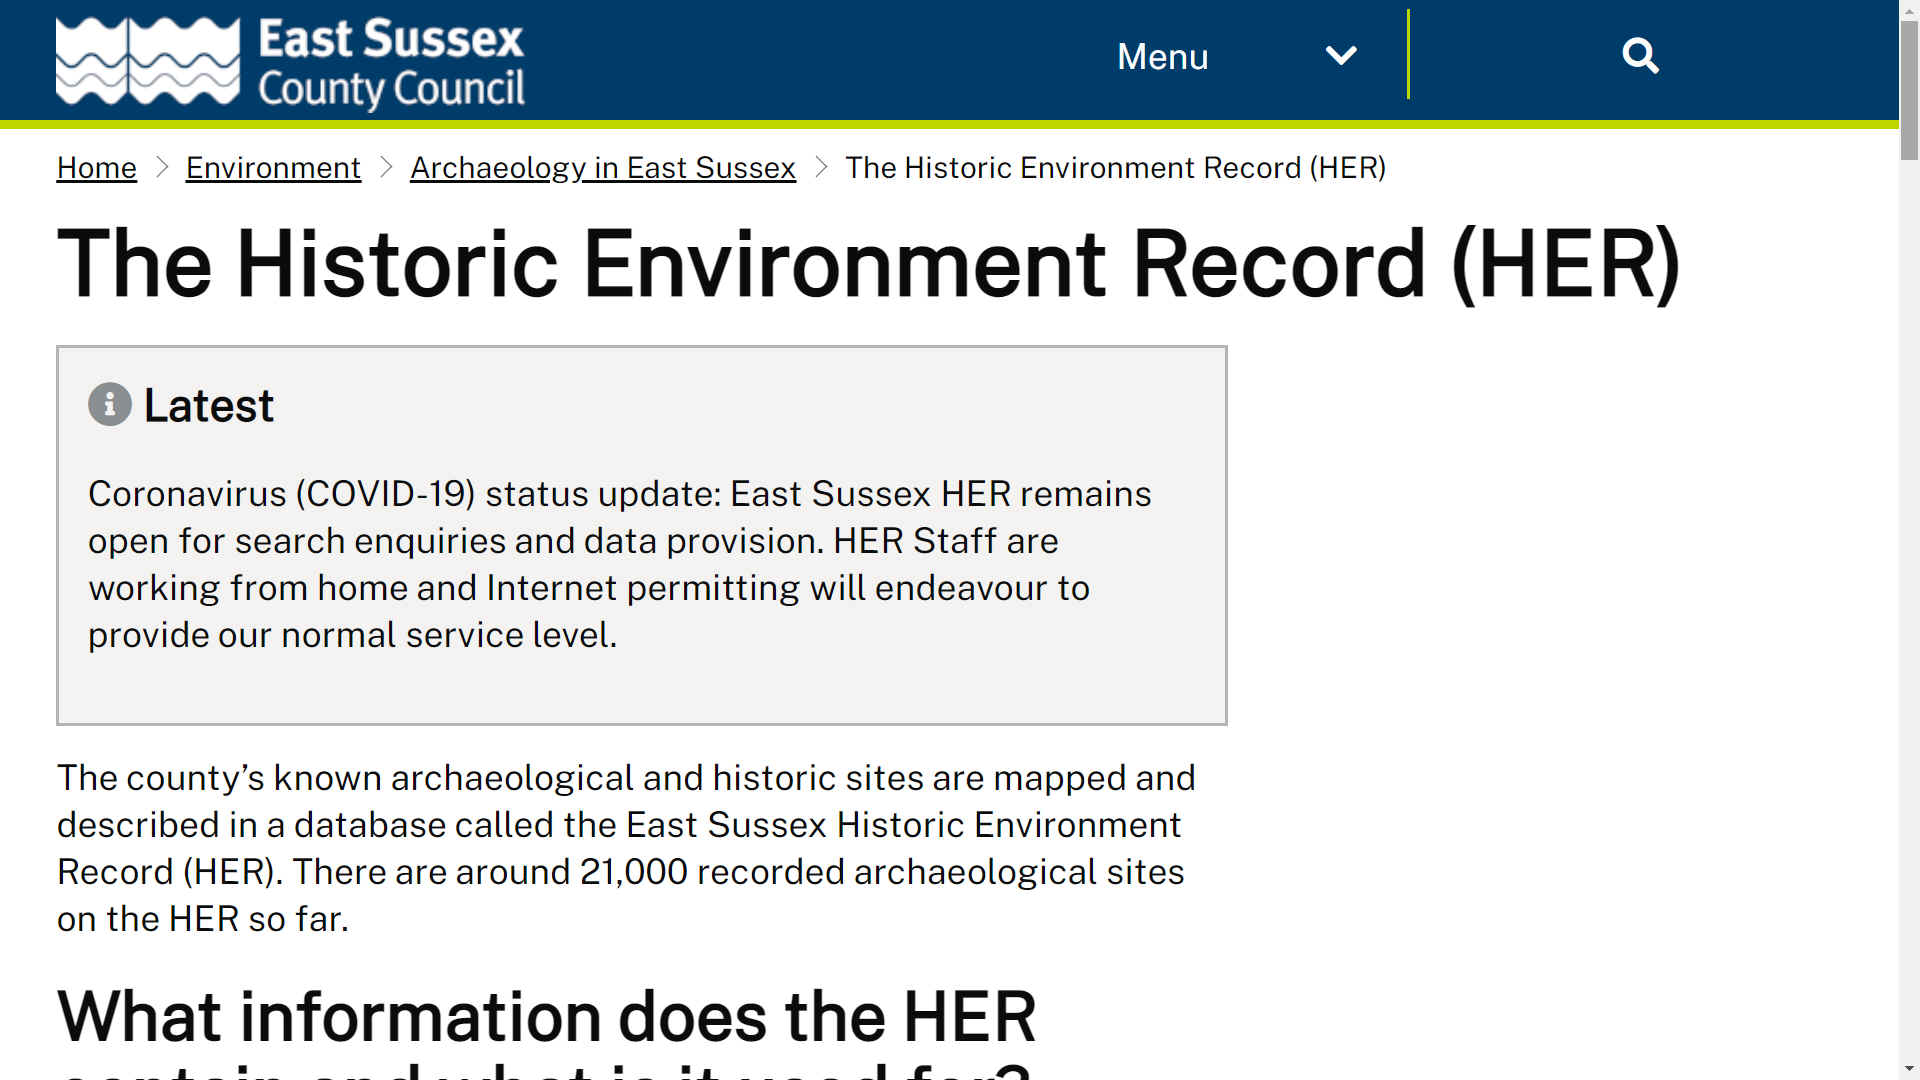 HER the Historic Environment Record, East Sussex County Council